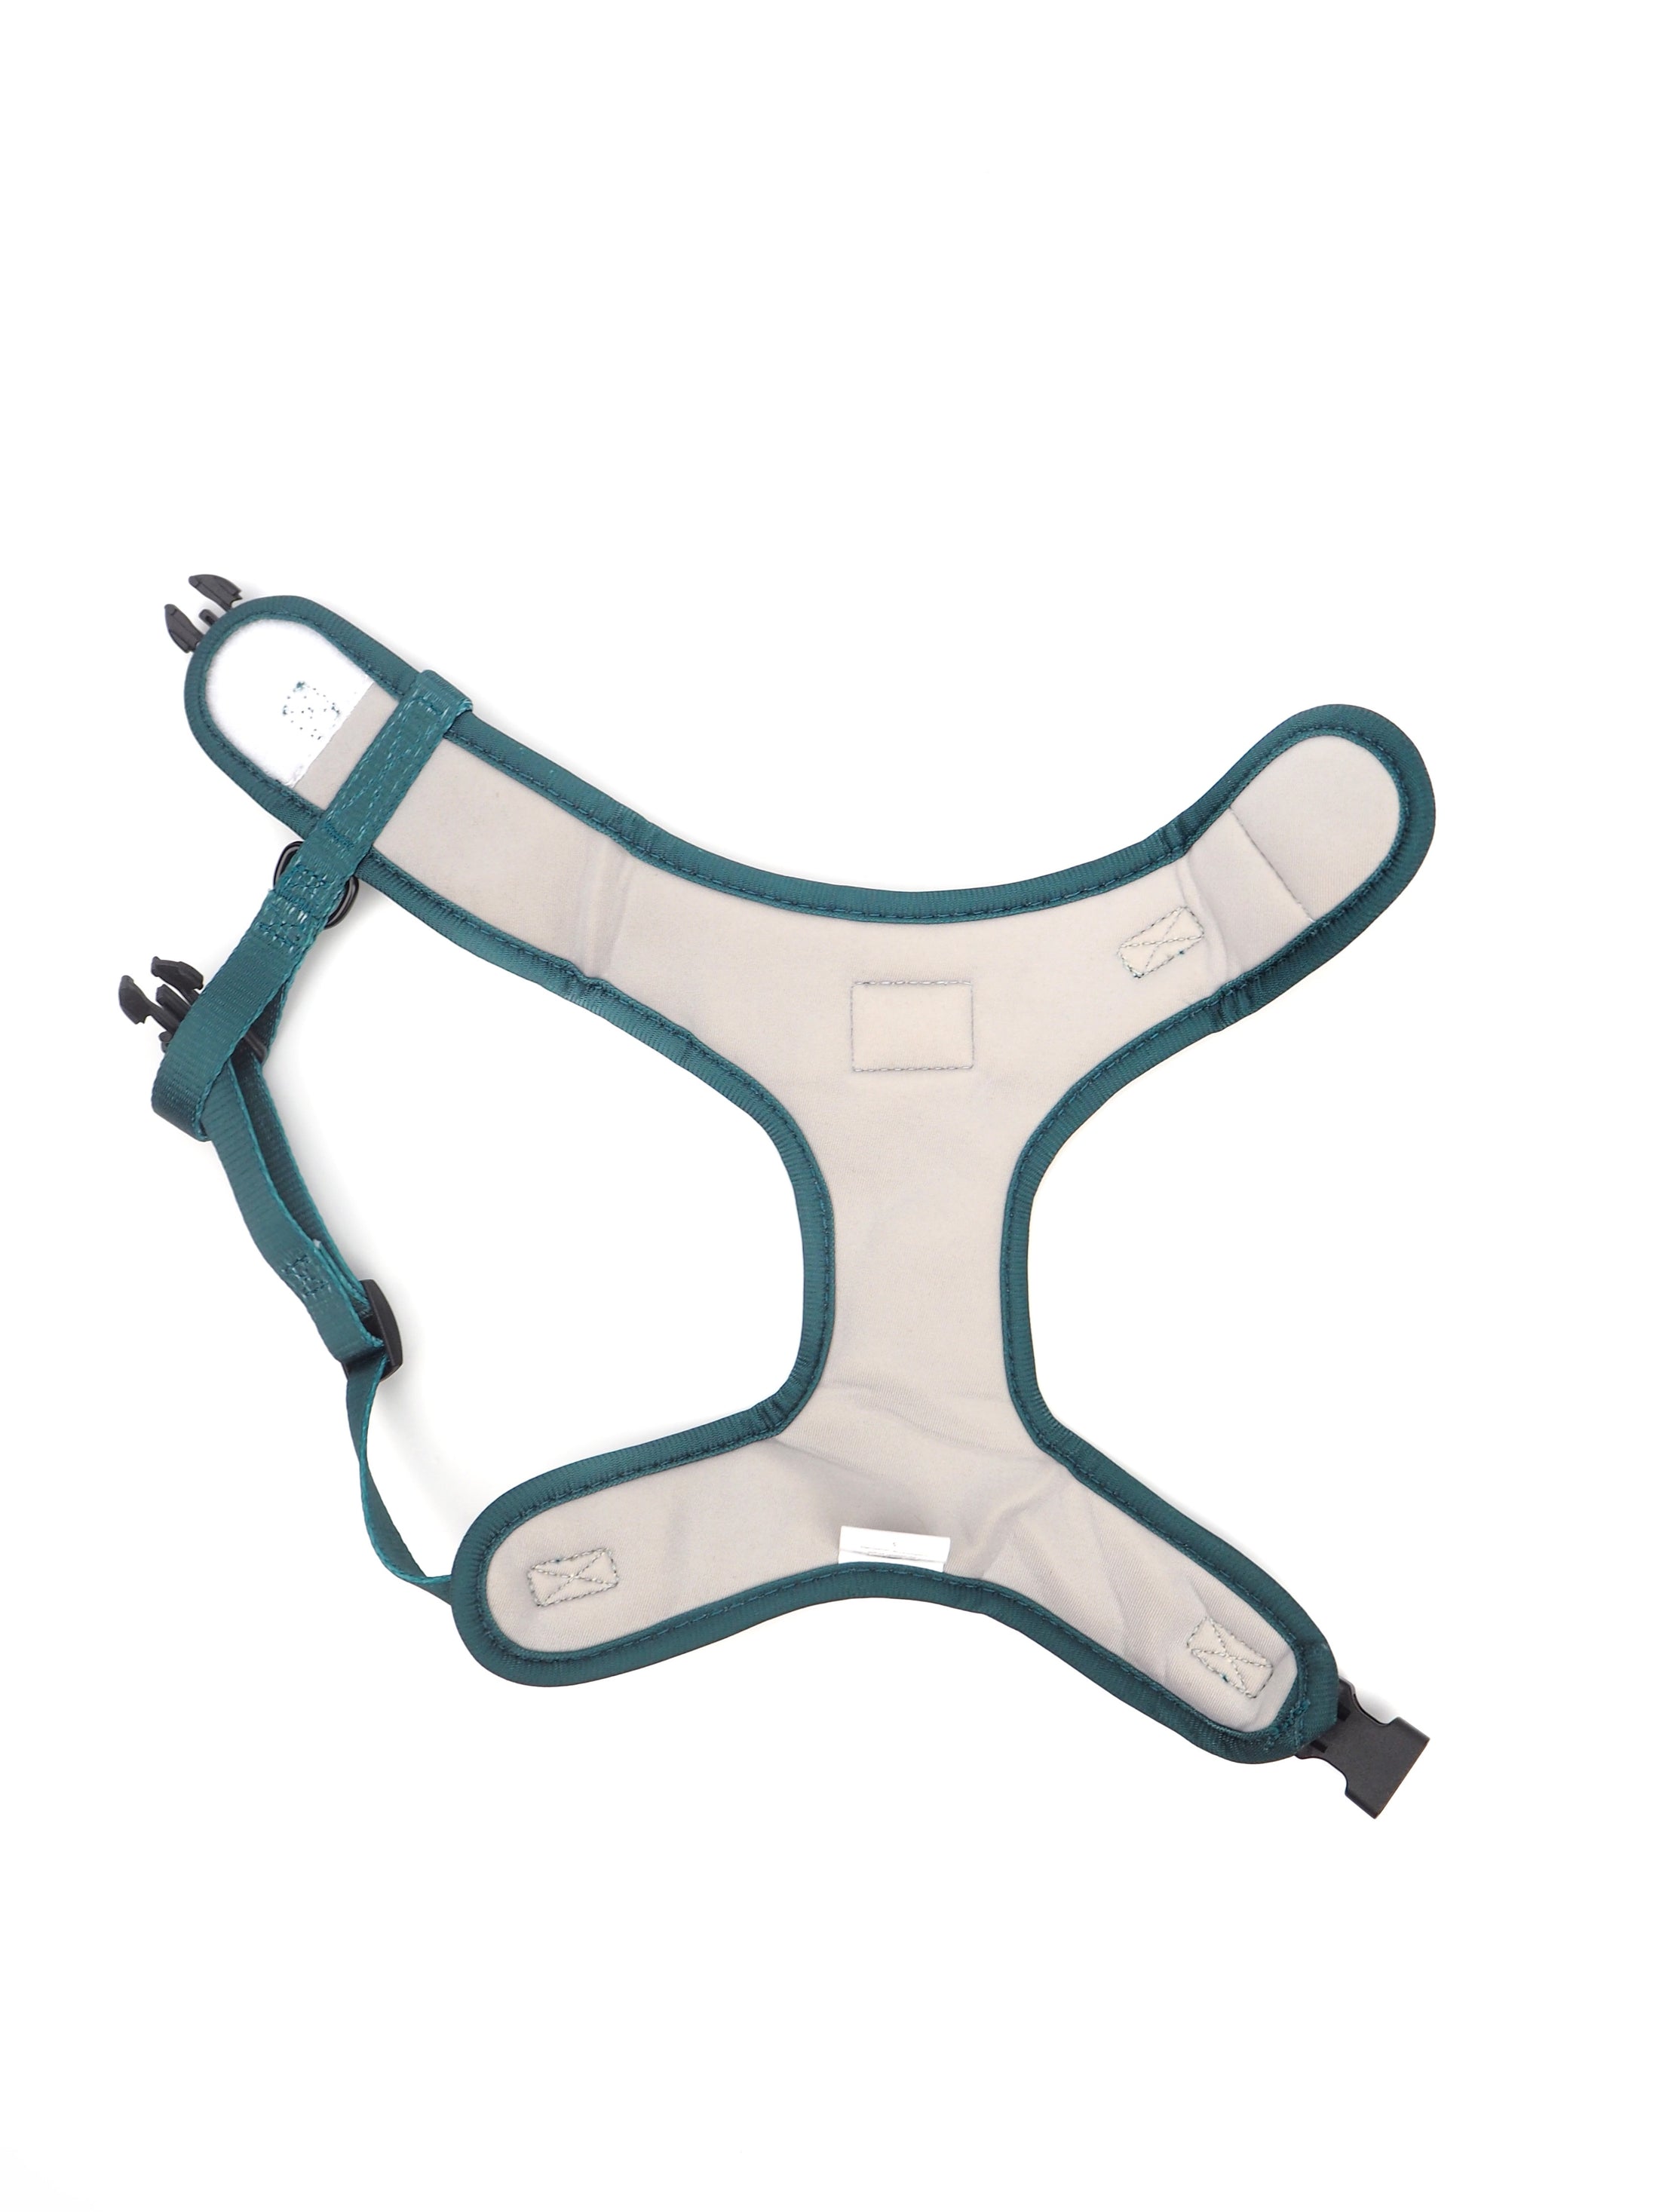 Emerald Envy Step In Harness by Pupstyle StoreHarness